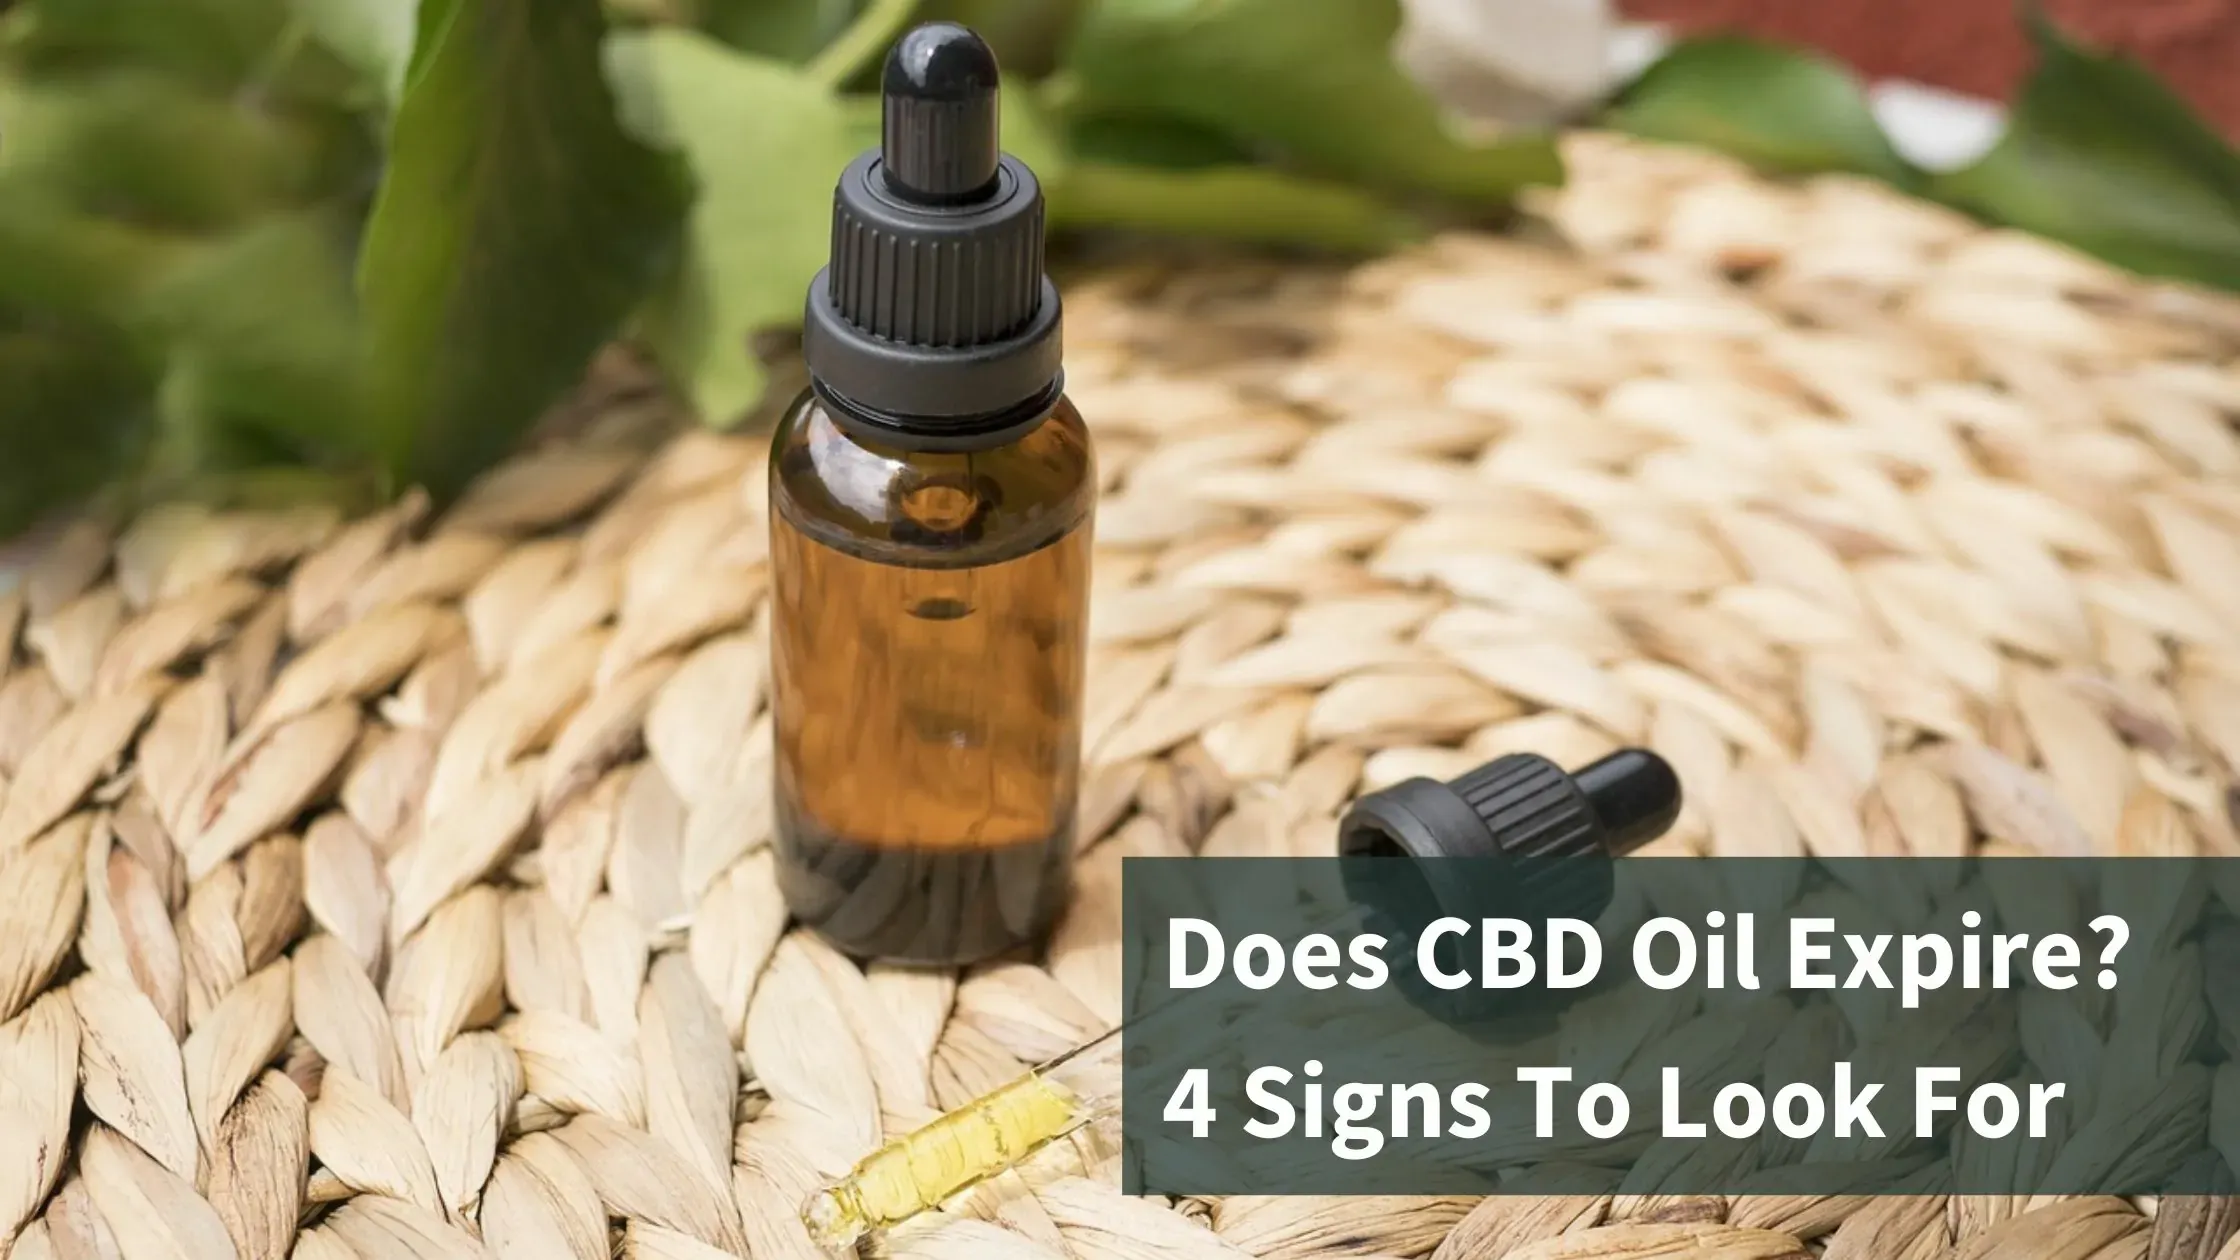 Blank CBD oil and dropper. Text says "Does CBD oil expire? 4 Things to look for."